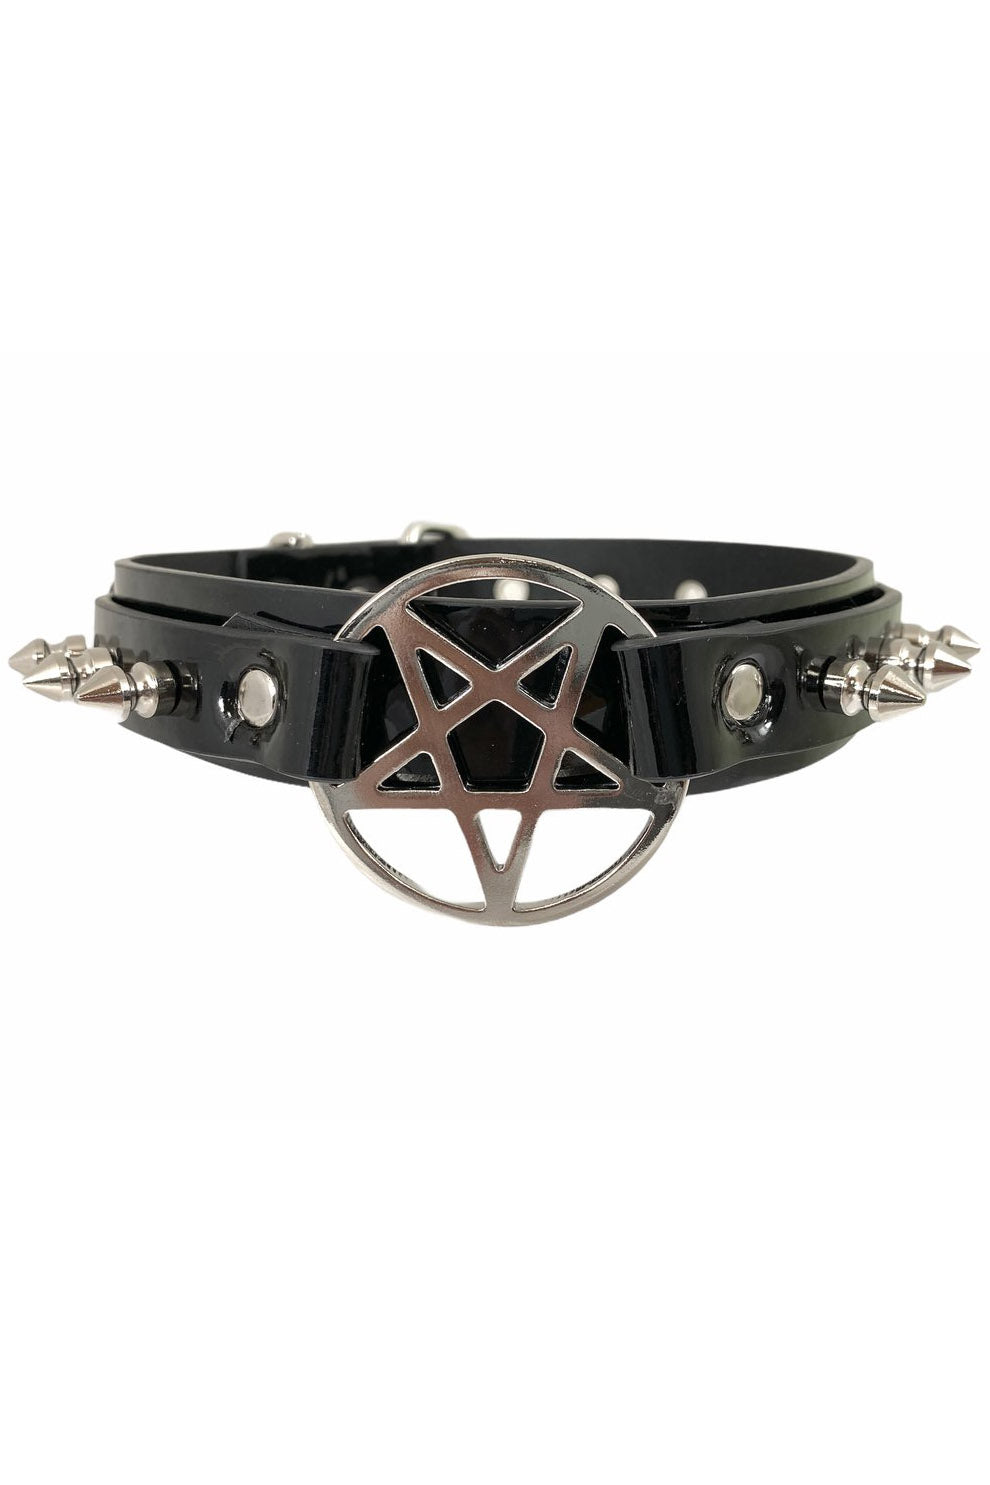 Gothic Leather Pentagram Choker Pagan Wicca Spiked Choker 